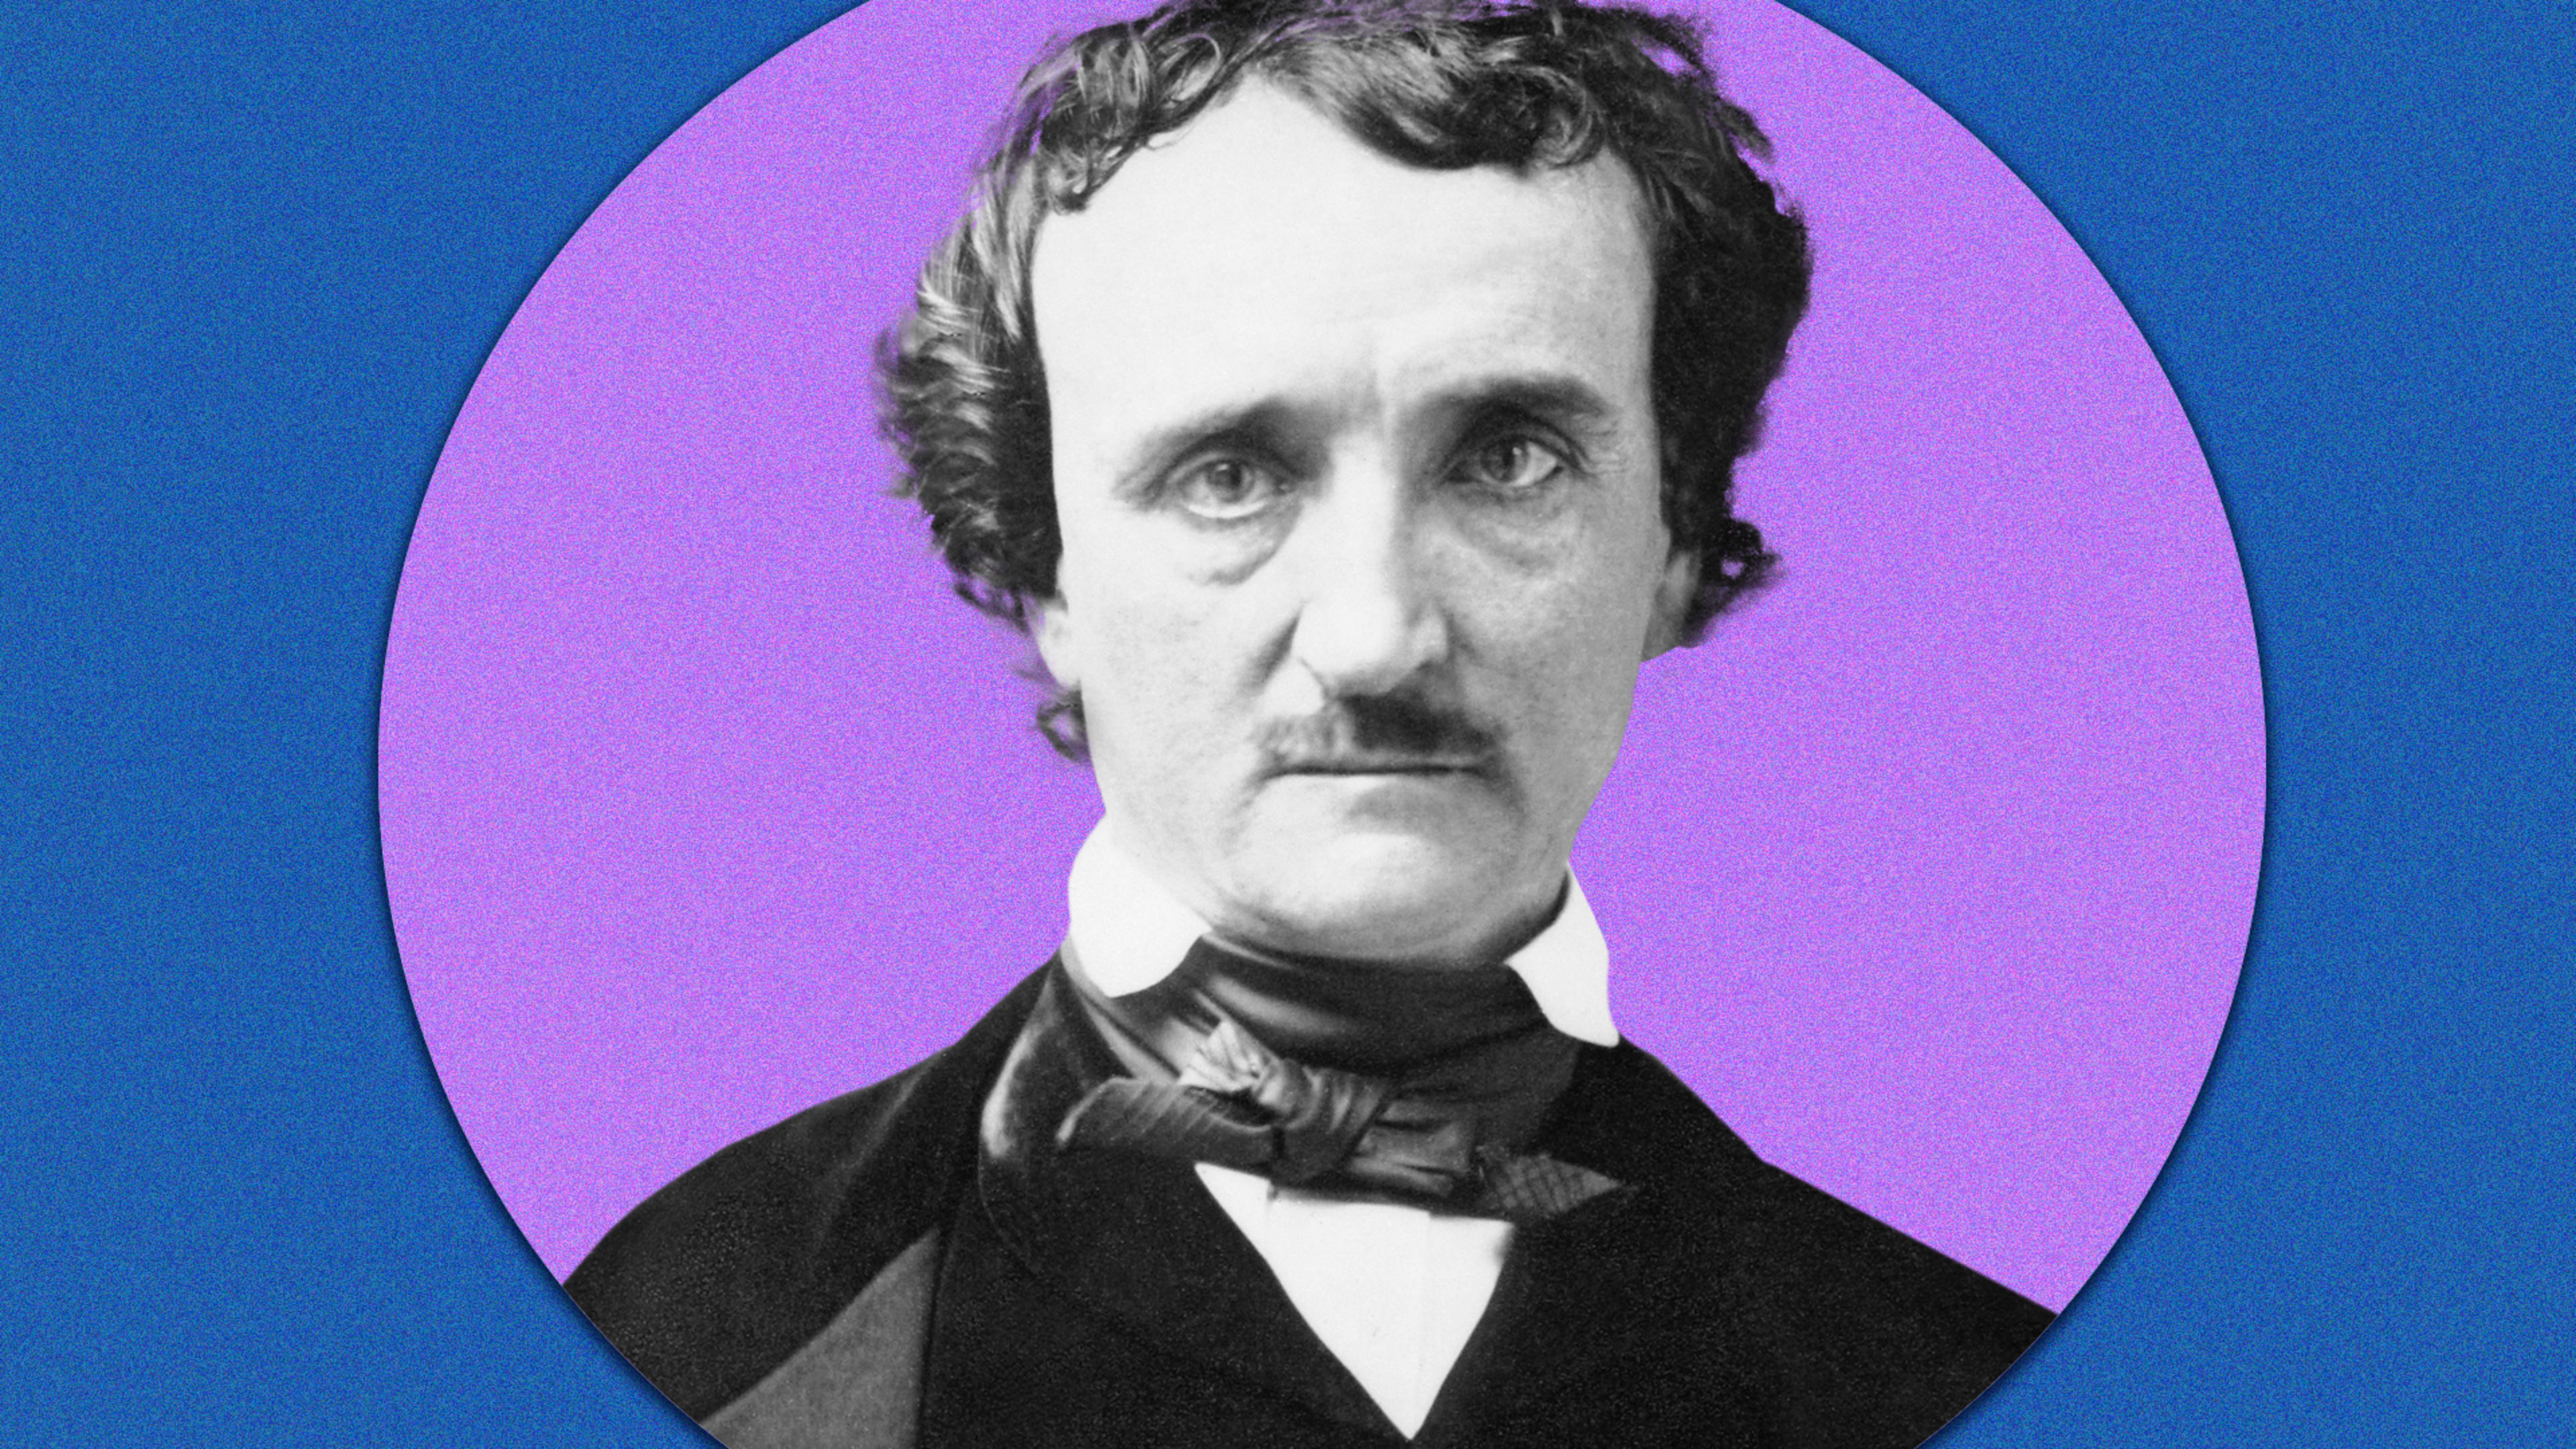 Edgar Allan Poe probably didn’t commit suicide, says computer textual analysis